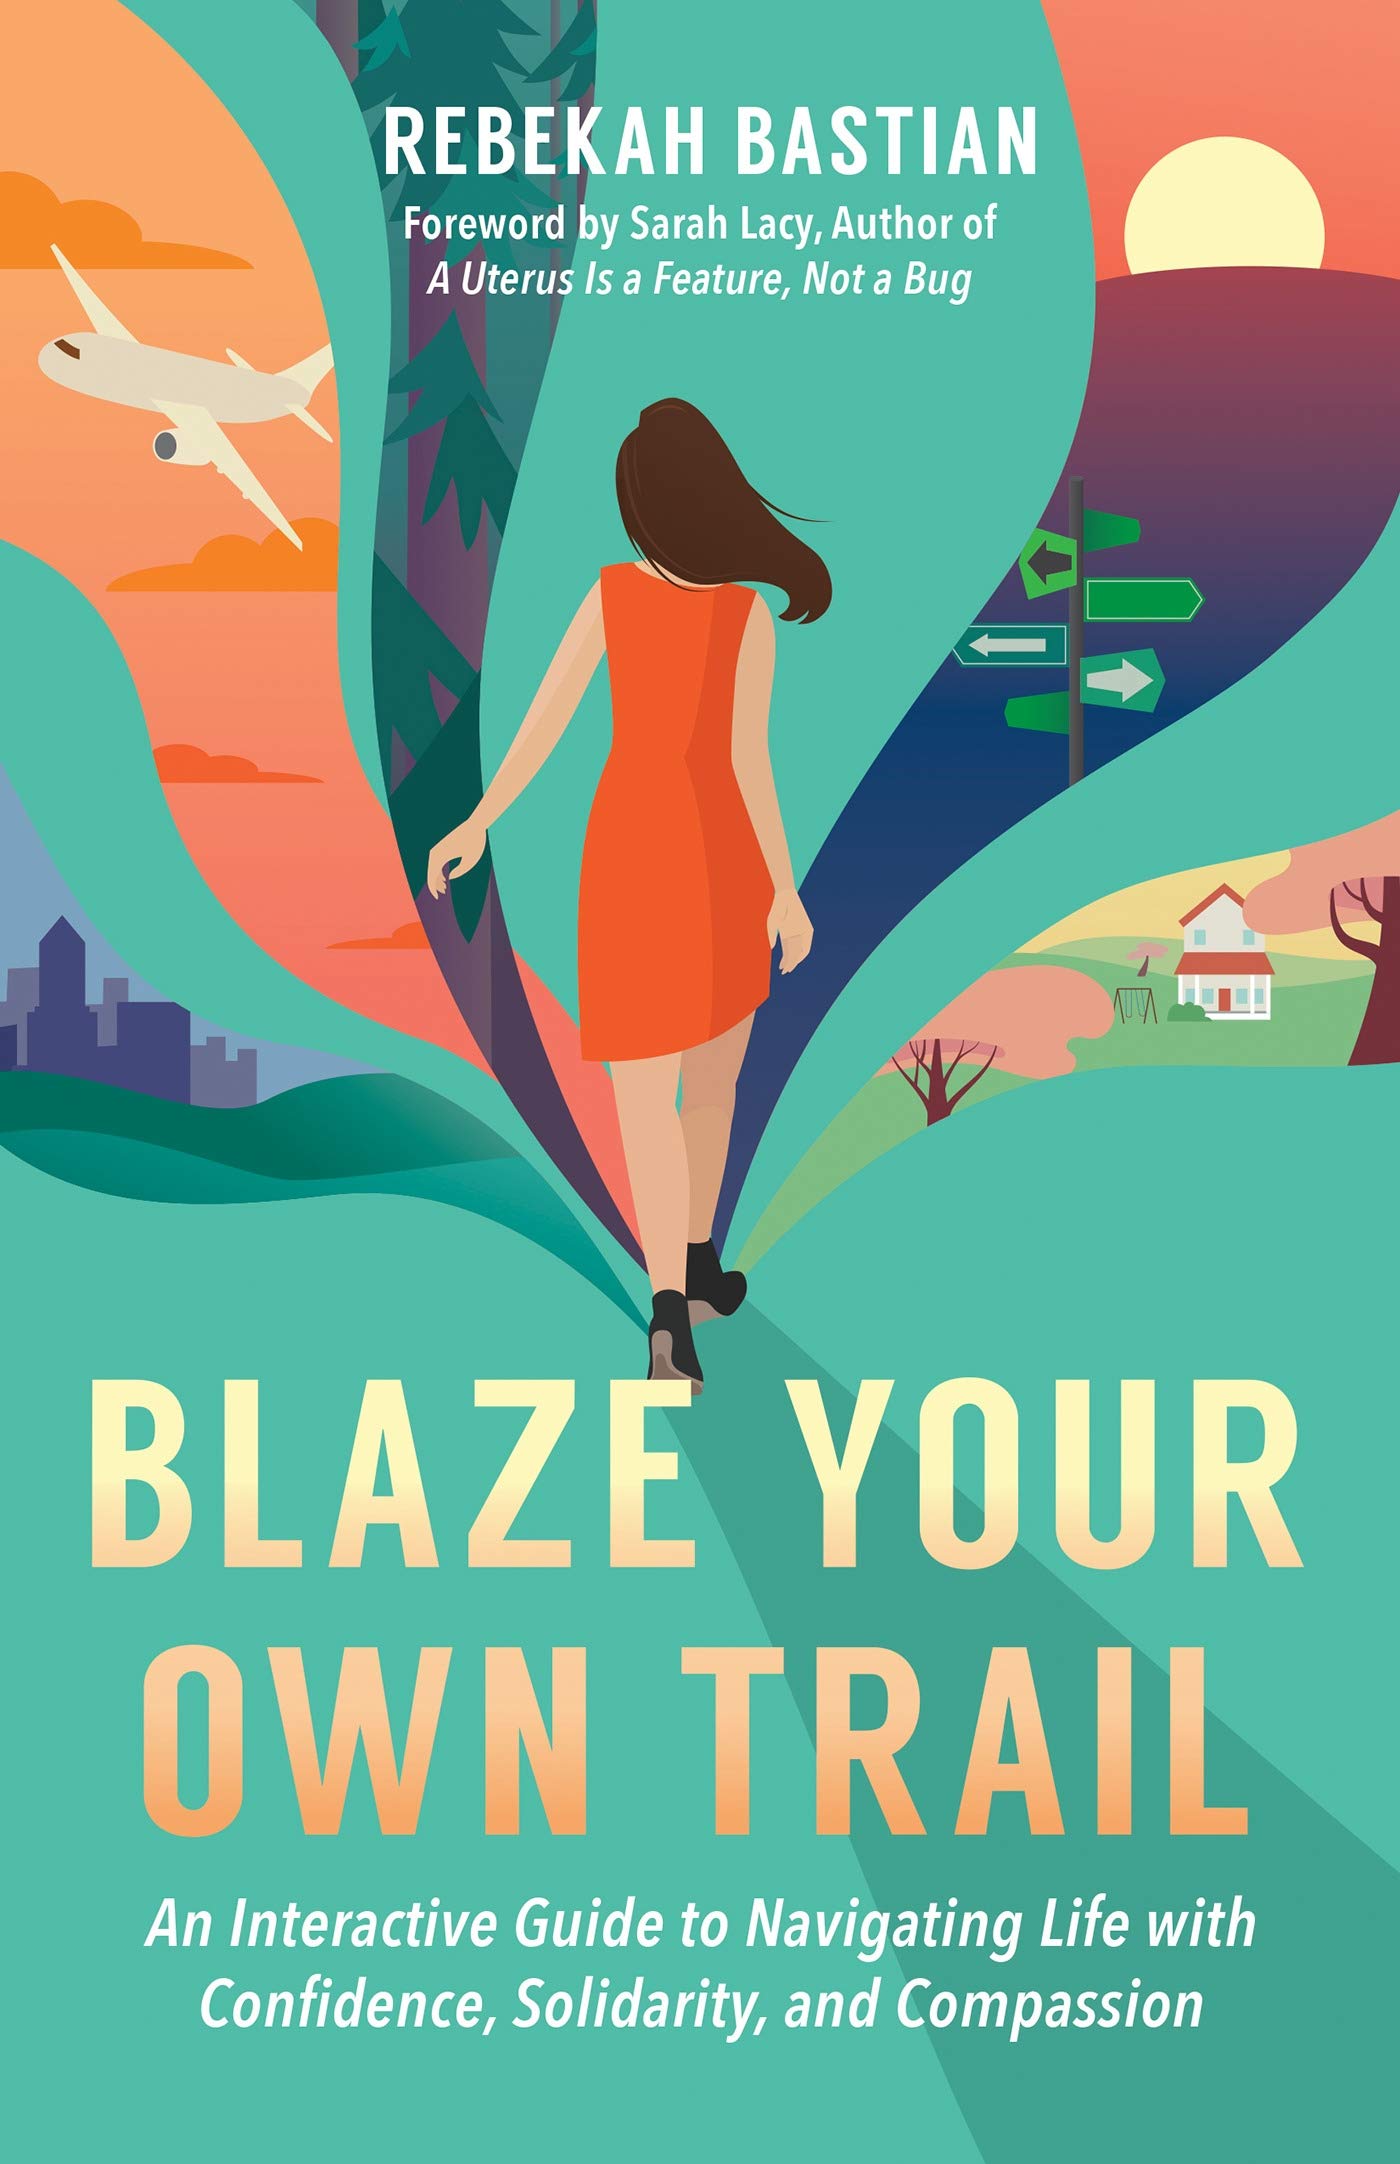 Blaze Your Own Trail: An Interactive Guide to Navigating Life with Confidence, Solidarity and Compassion